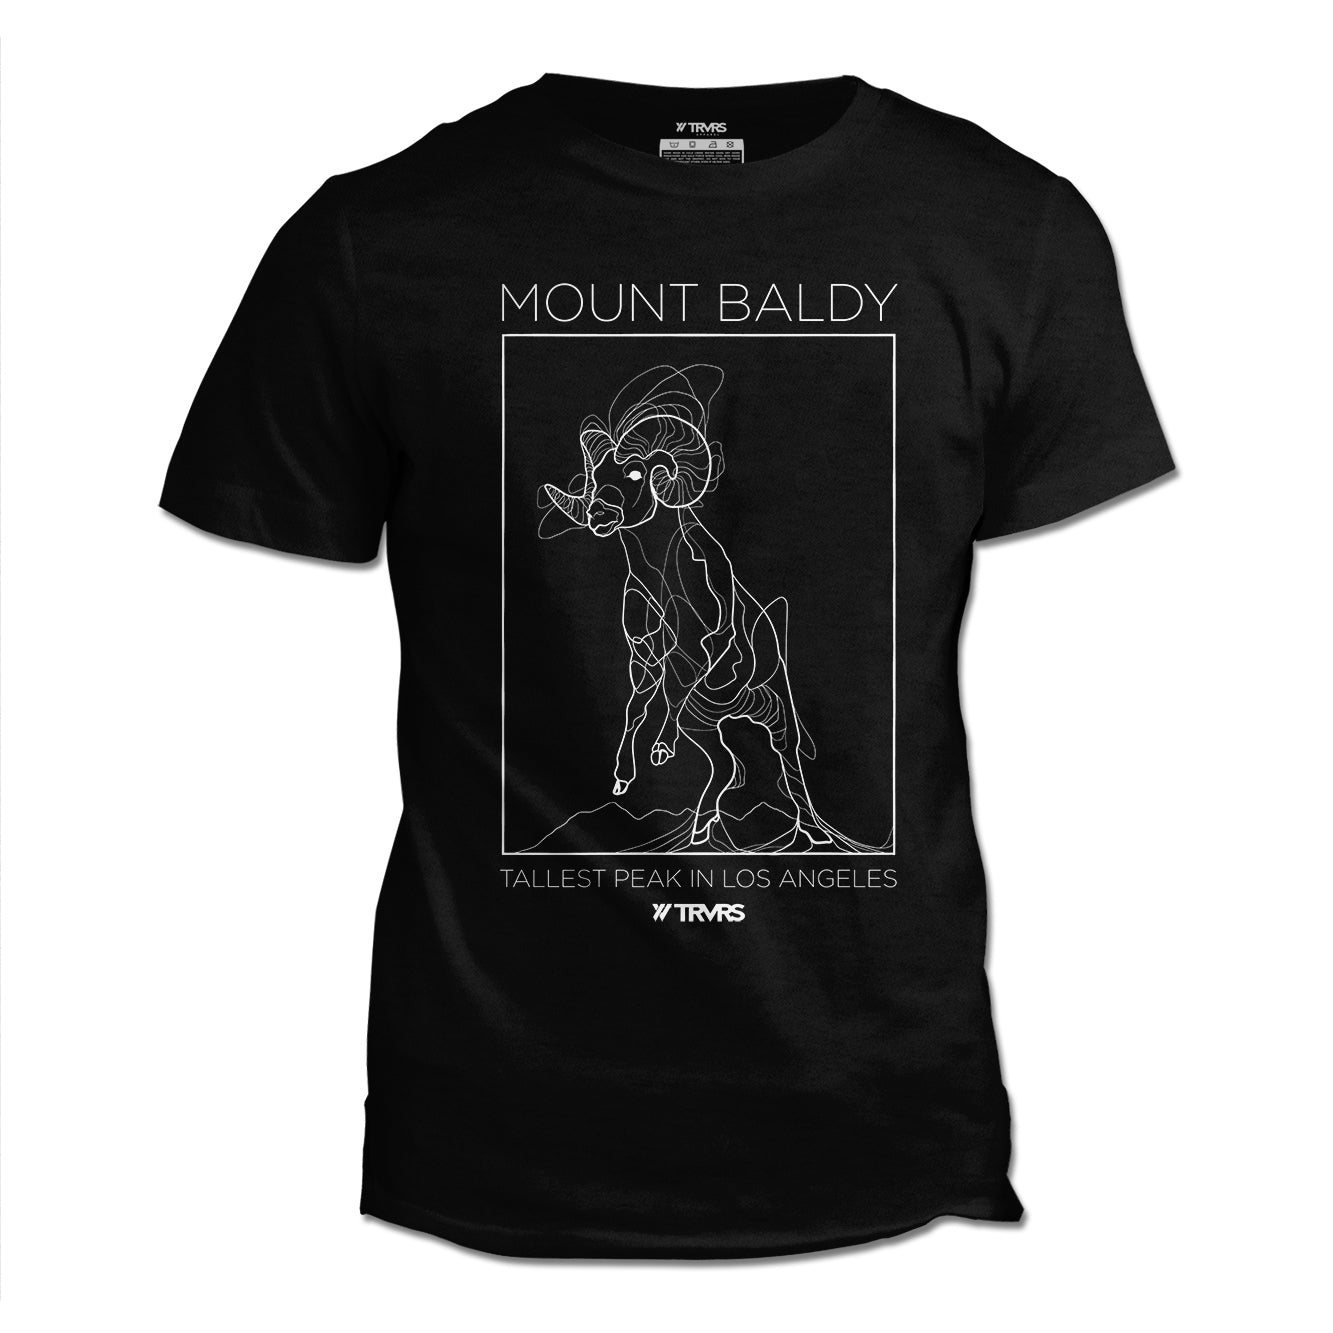 Mount Baldy Big Horn Tee V2 - BLACK HEATHER | TRVRS Outdoors, hiking apparel, san gabriel mountains, angeles national forest, trail running, mountaineering